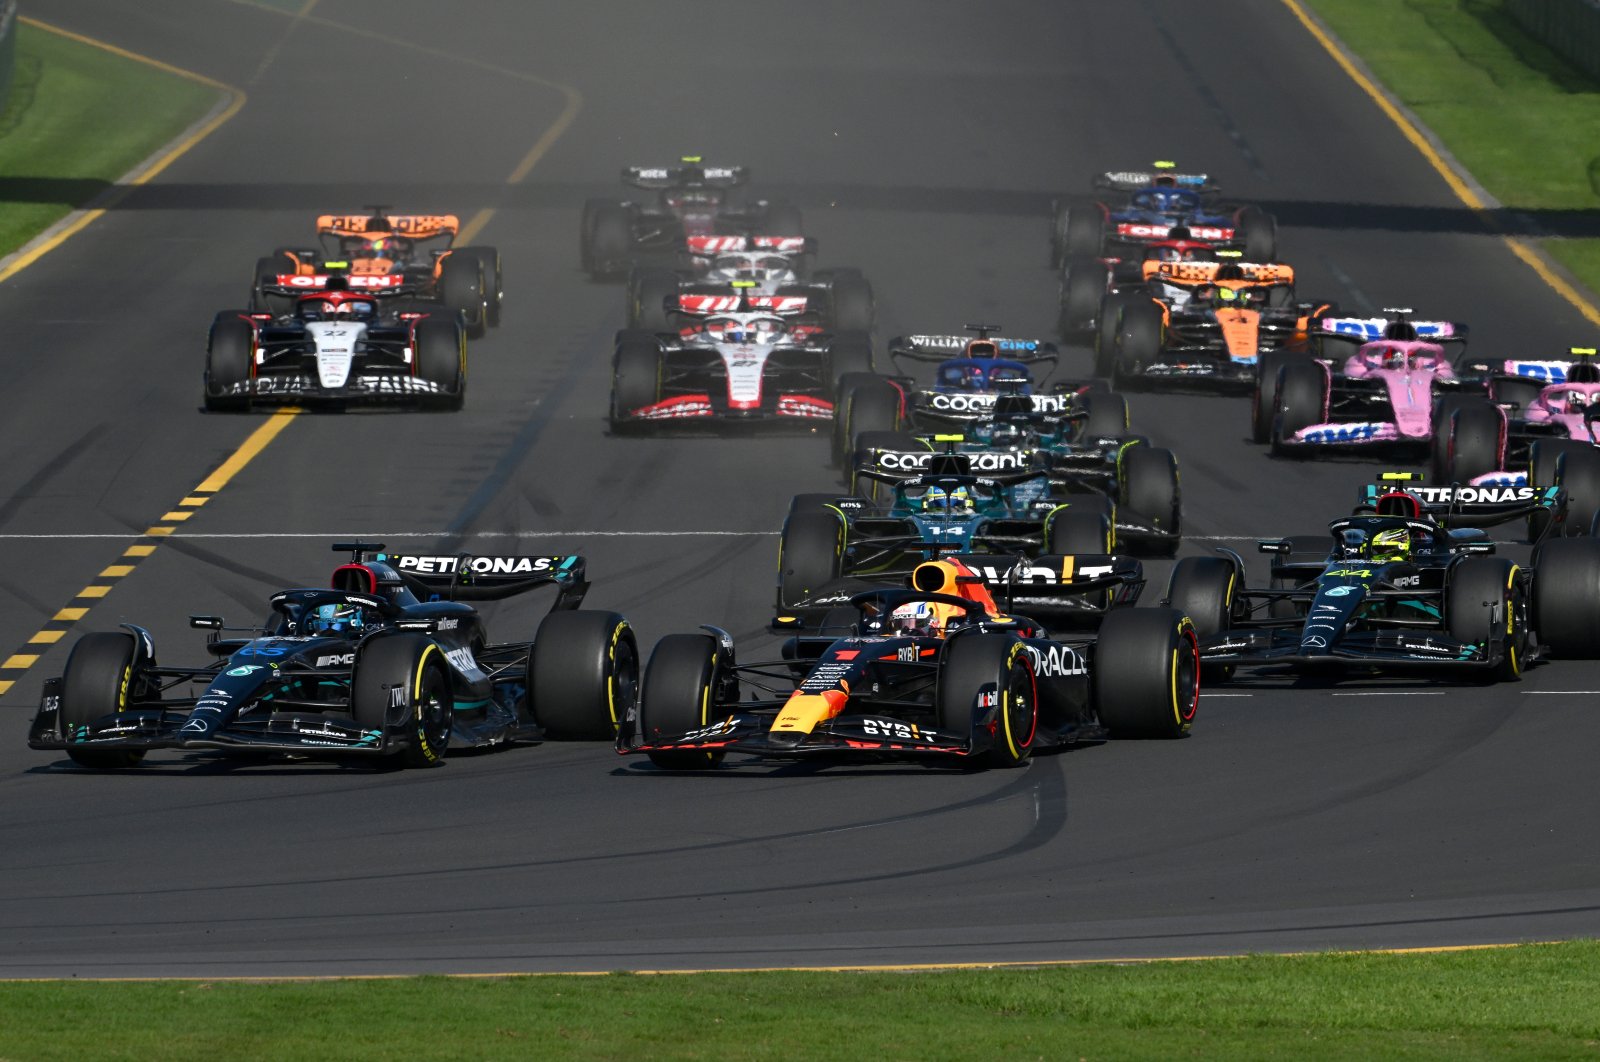 Mercedes driver George Russell of Great Britain (L) passes Red Bull driver Max Verstappen of Netherlands (2nd L) at the start of the 2023 Australian Grand Prix at the Albert Park Circuit, Melbourne, Australia, April 2, 2023. (EPA Photo)